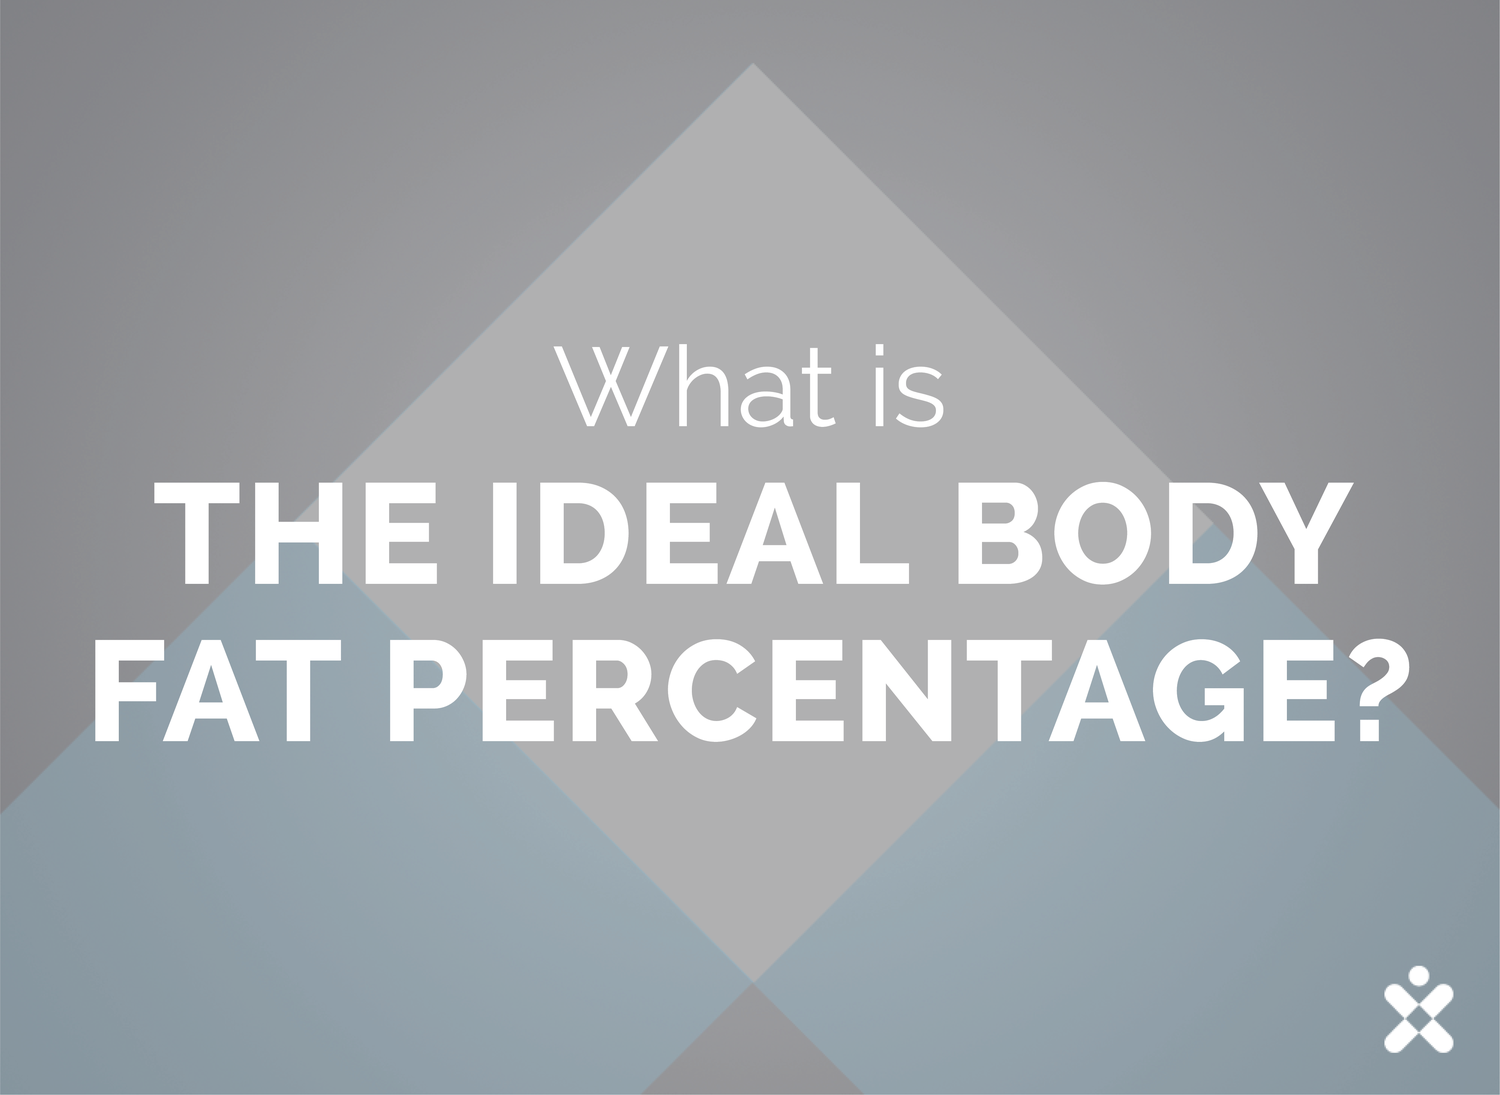 What is an IDEAL body fat percentage?